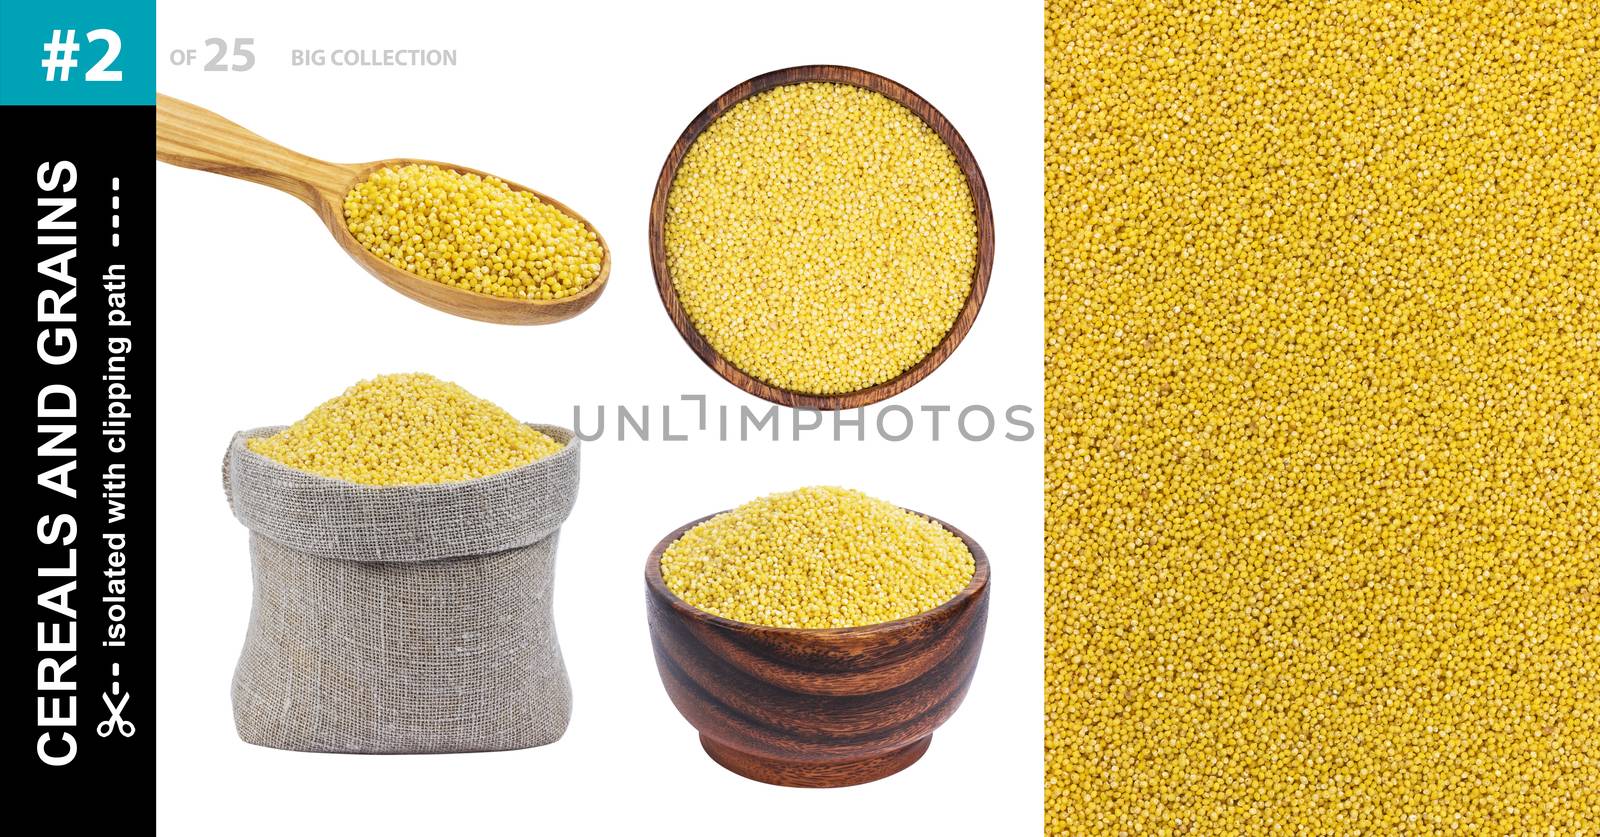 Millet seeds in different dishware isolated on white background, millet grains in bowl, spoon and bag, collection